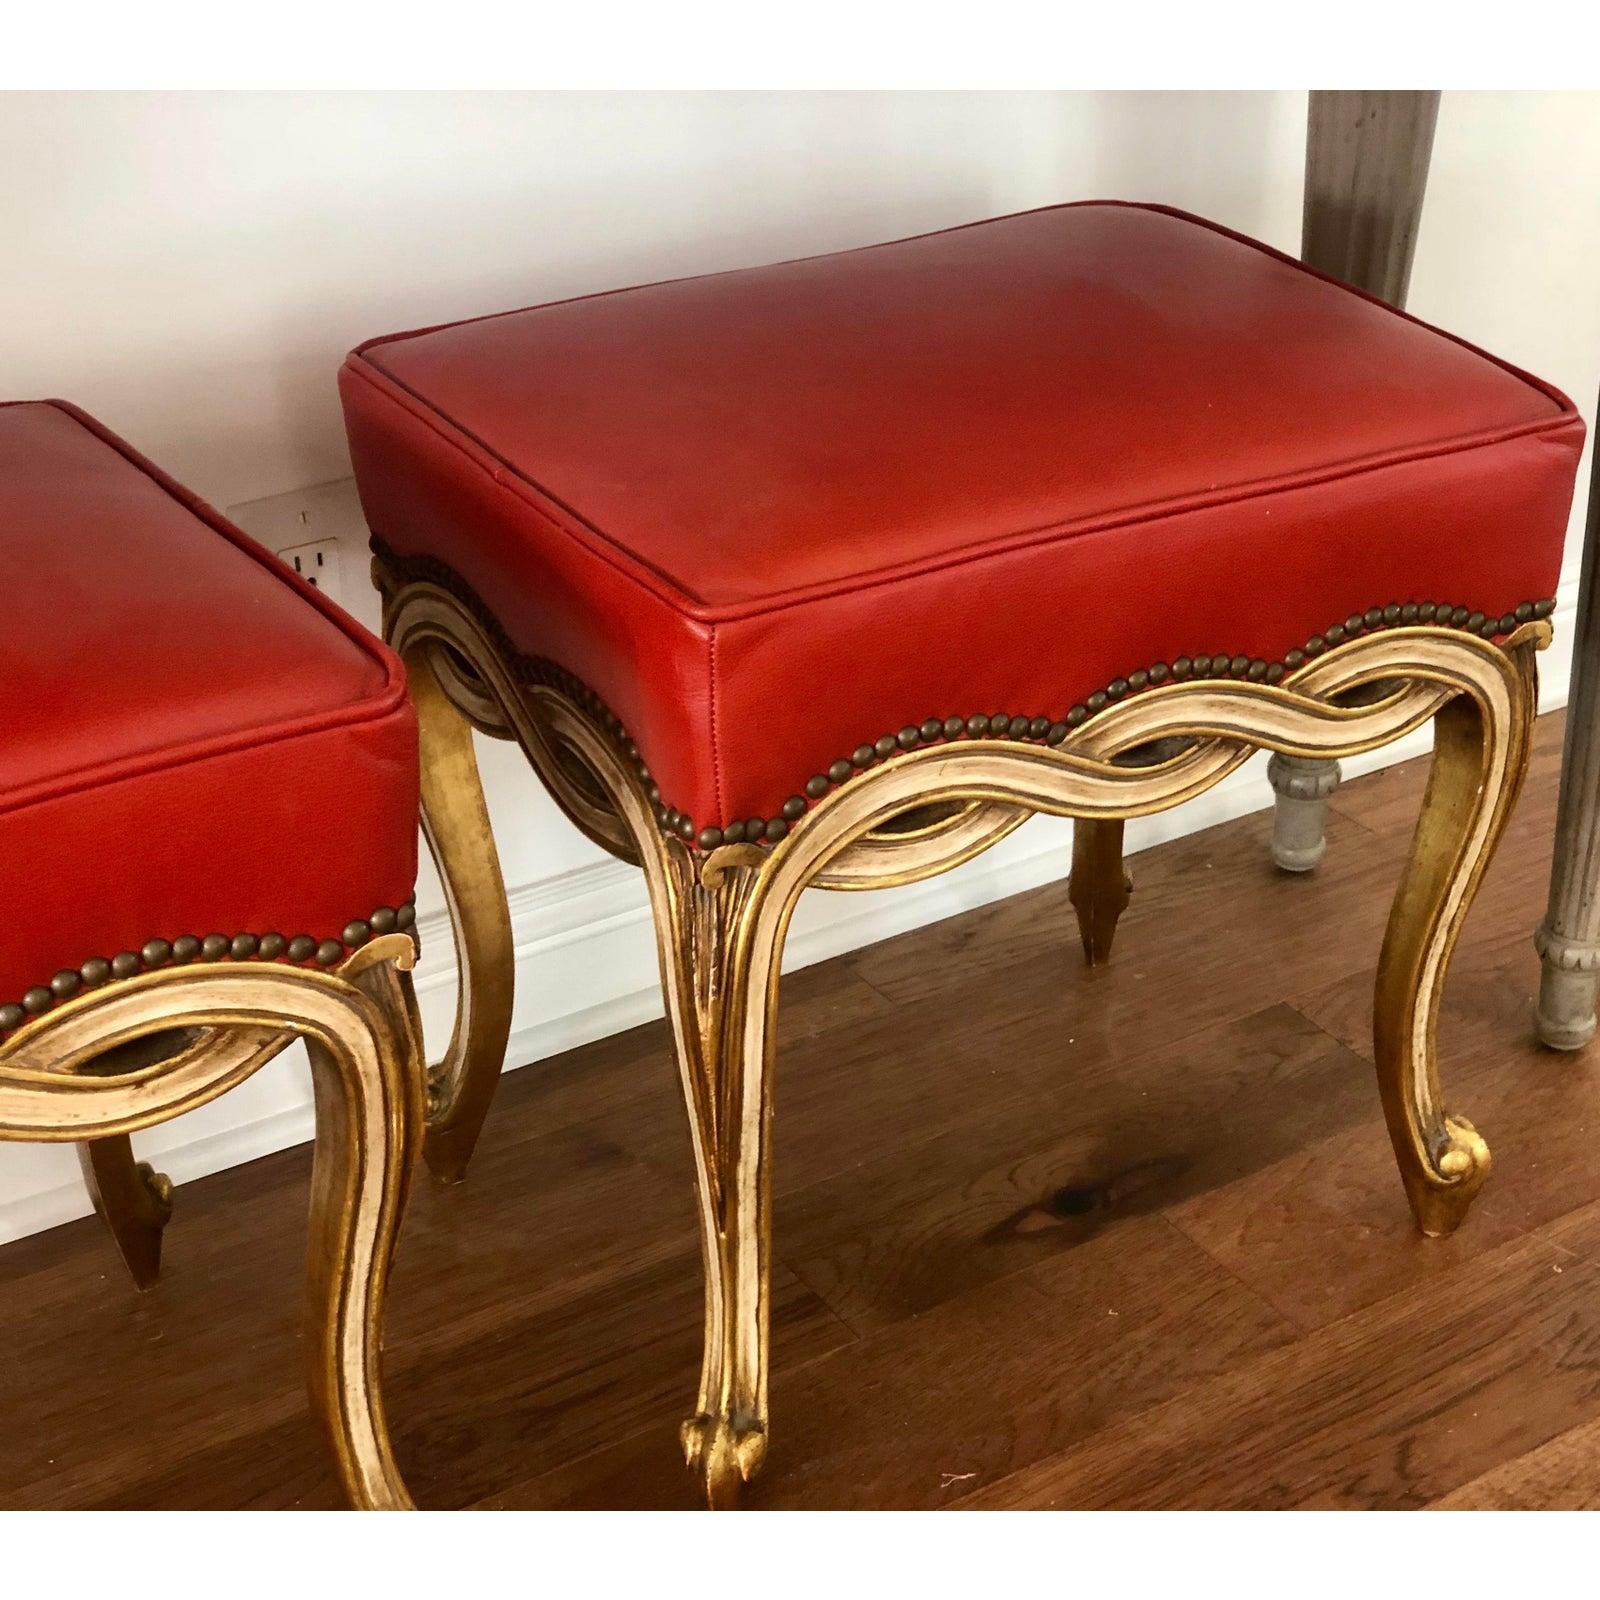 Pair of Regency Style Ribbon Taboret Bench by Randy Esada Designs for Prospr in Red-orange Leather.

Additional information:
Materials: Giltwood, Leather
Color: Orange
Brand: Randy Esada Designs for Prospr
Designer: Randy Esada Designs for